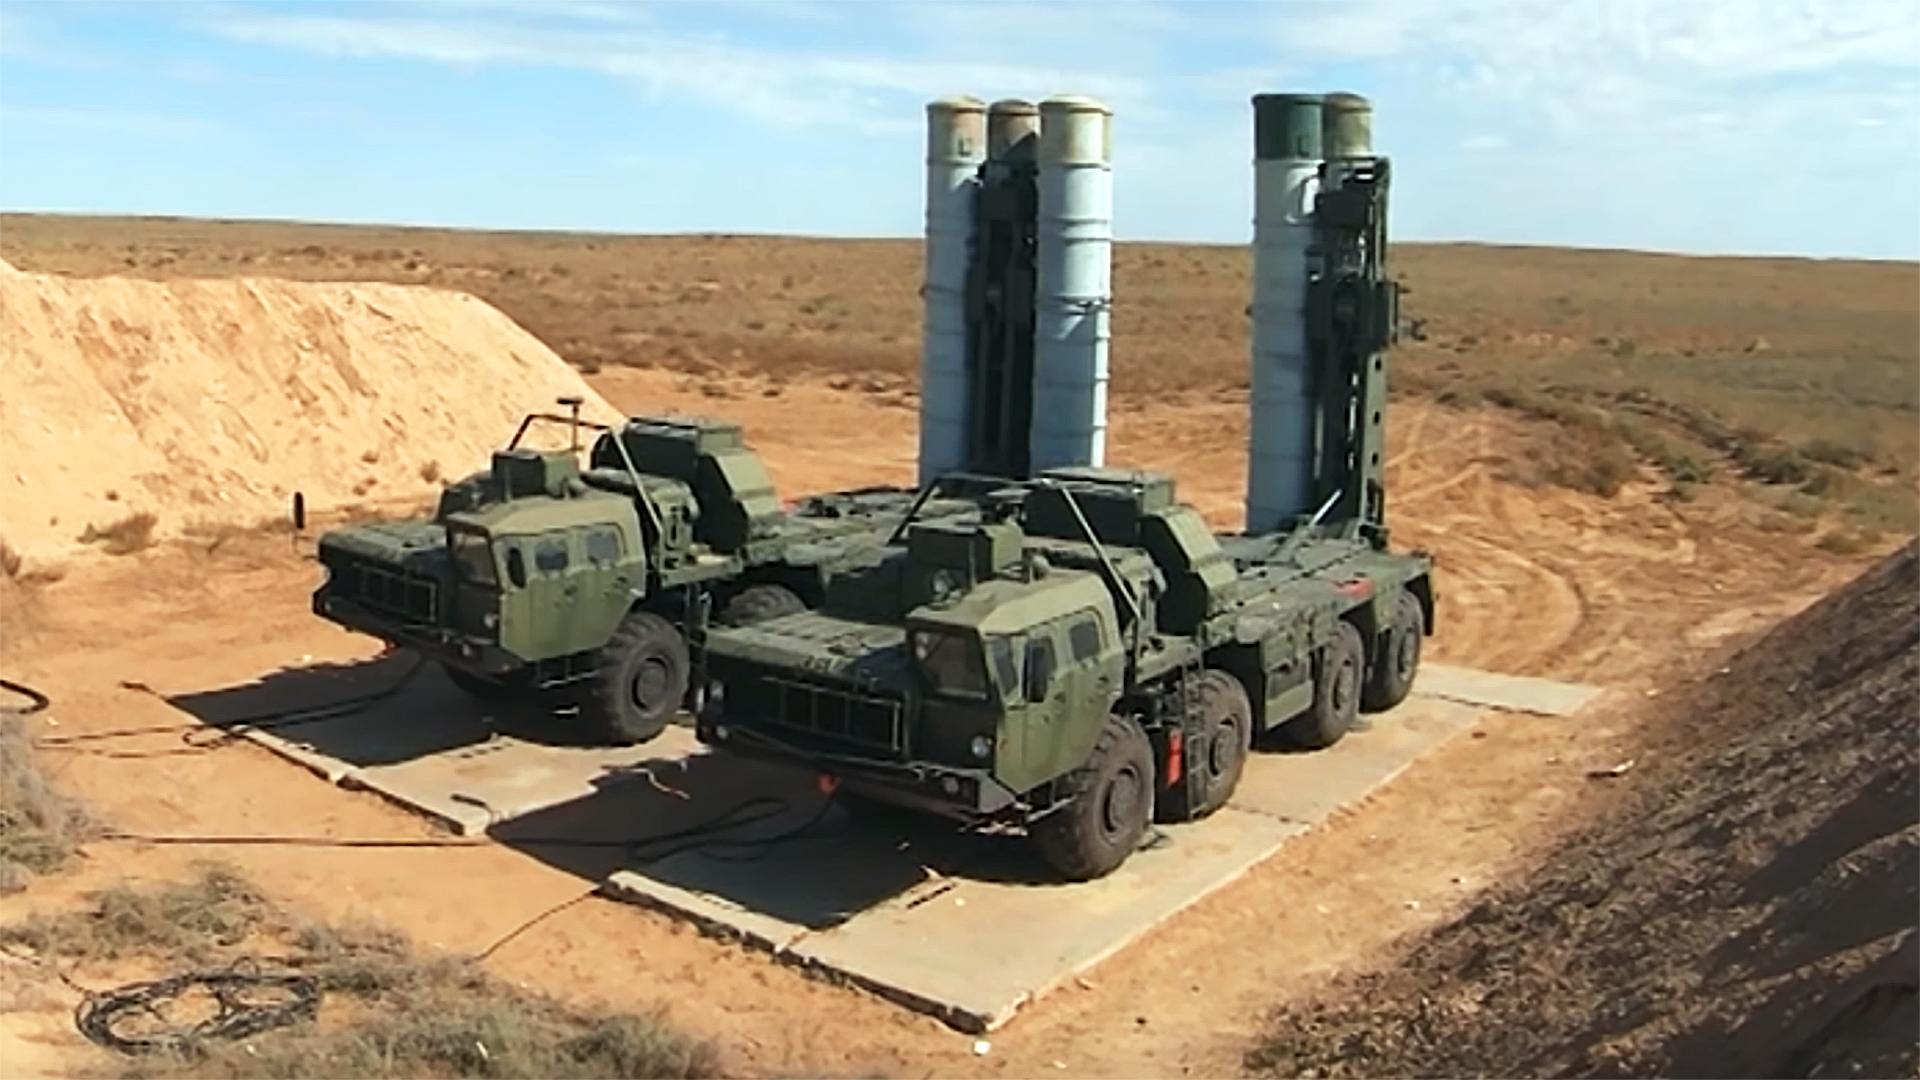 Russia Pulls Its ‘Syrian’ S-300 Missile Battery, Ships It To Black Sea